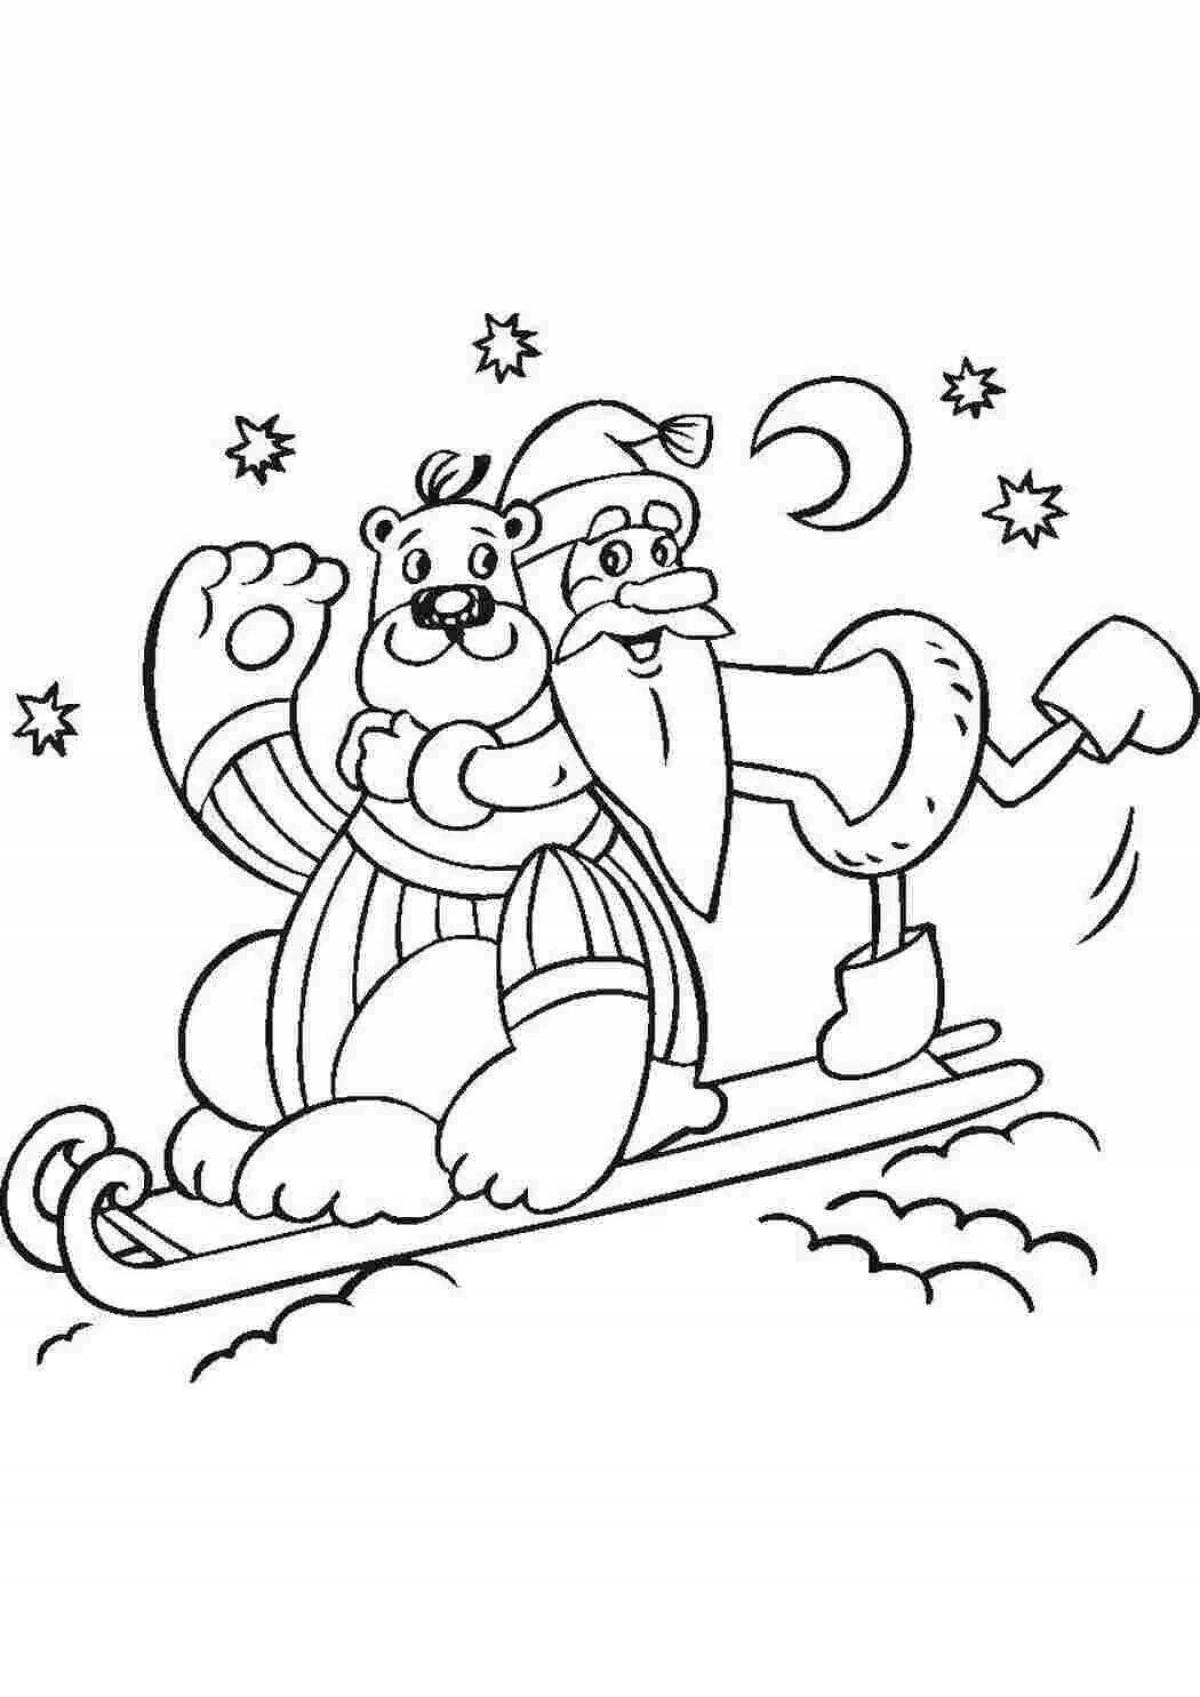 Colorful santa claus and animals coloring page